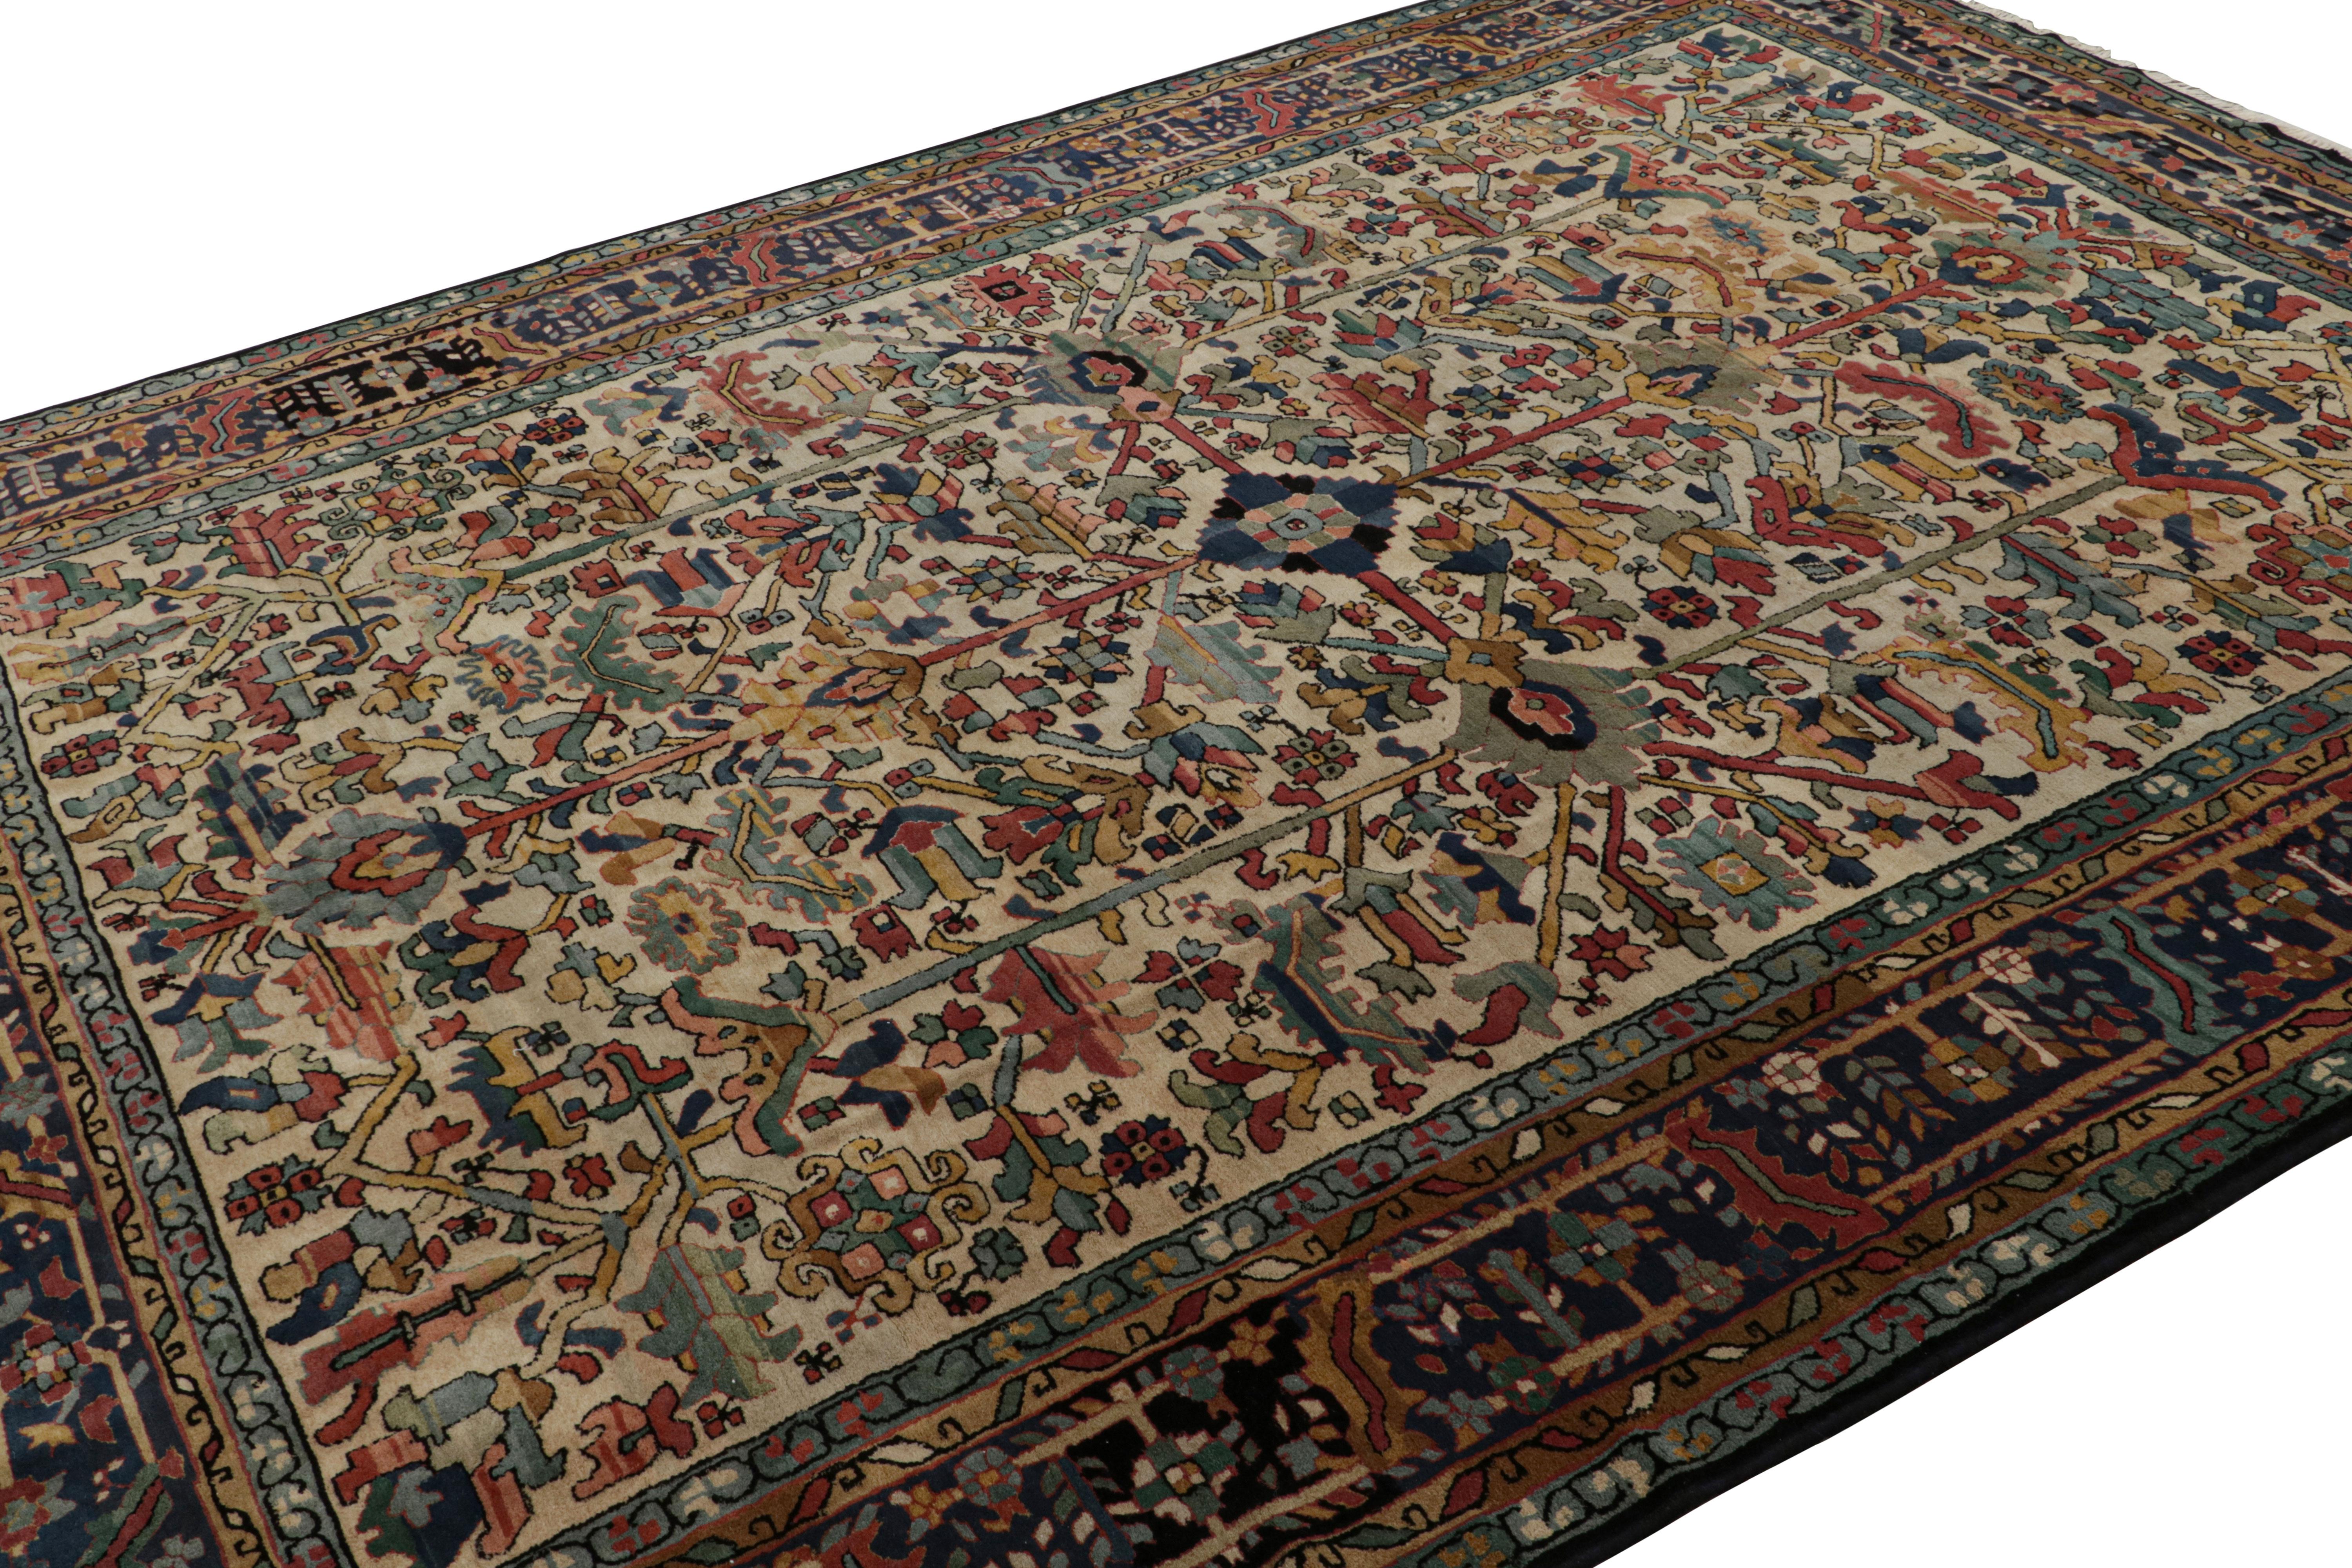 Hand Tufted wool, circa 1950-1960, this 9x12 rare vintage European rug is a collectible piece likely from a rare workshop or artist of the time—similar to hooked rugs of this period. 

On the Design: 

Connoisseurs will admire this vintage rug which